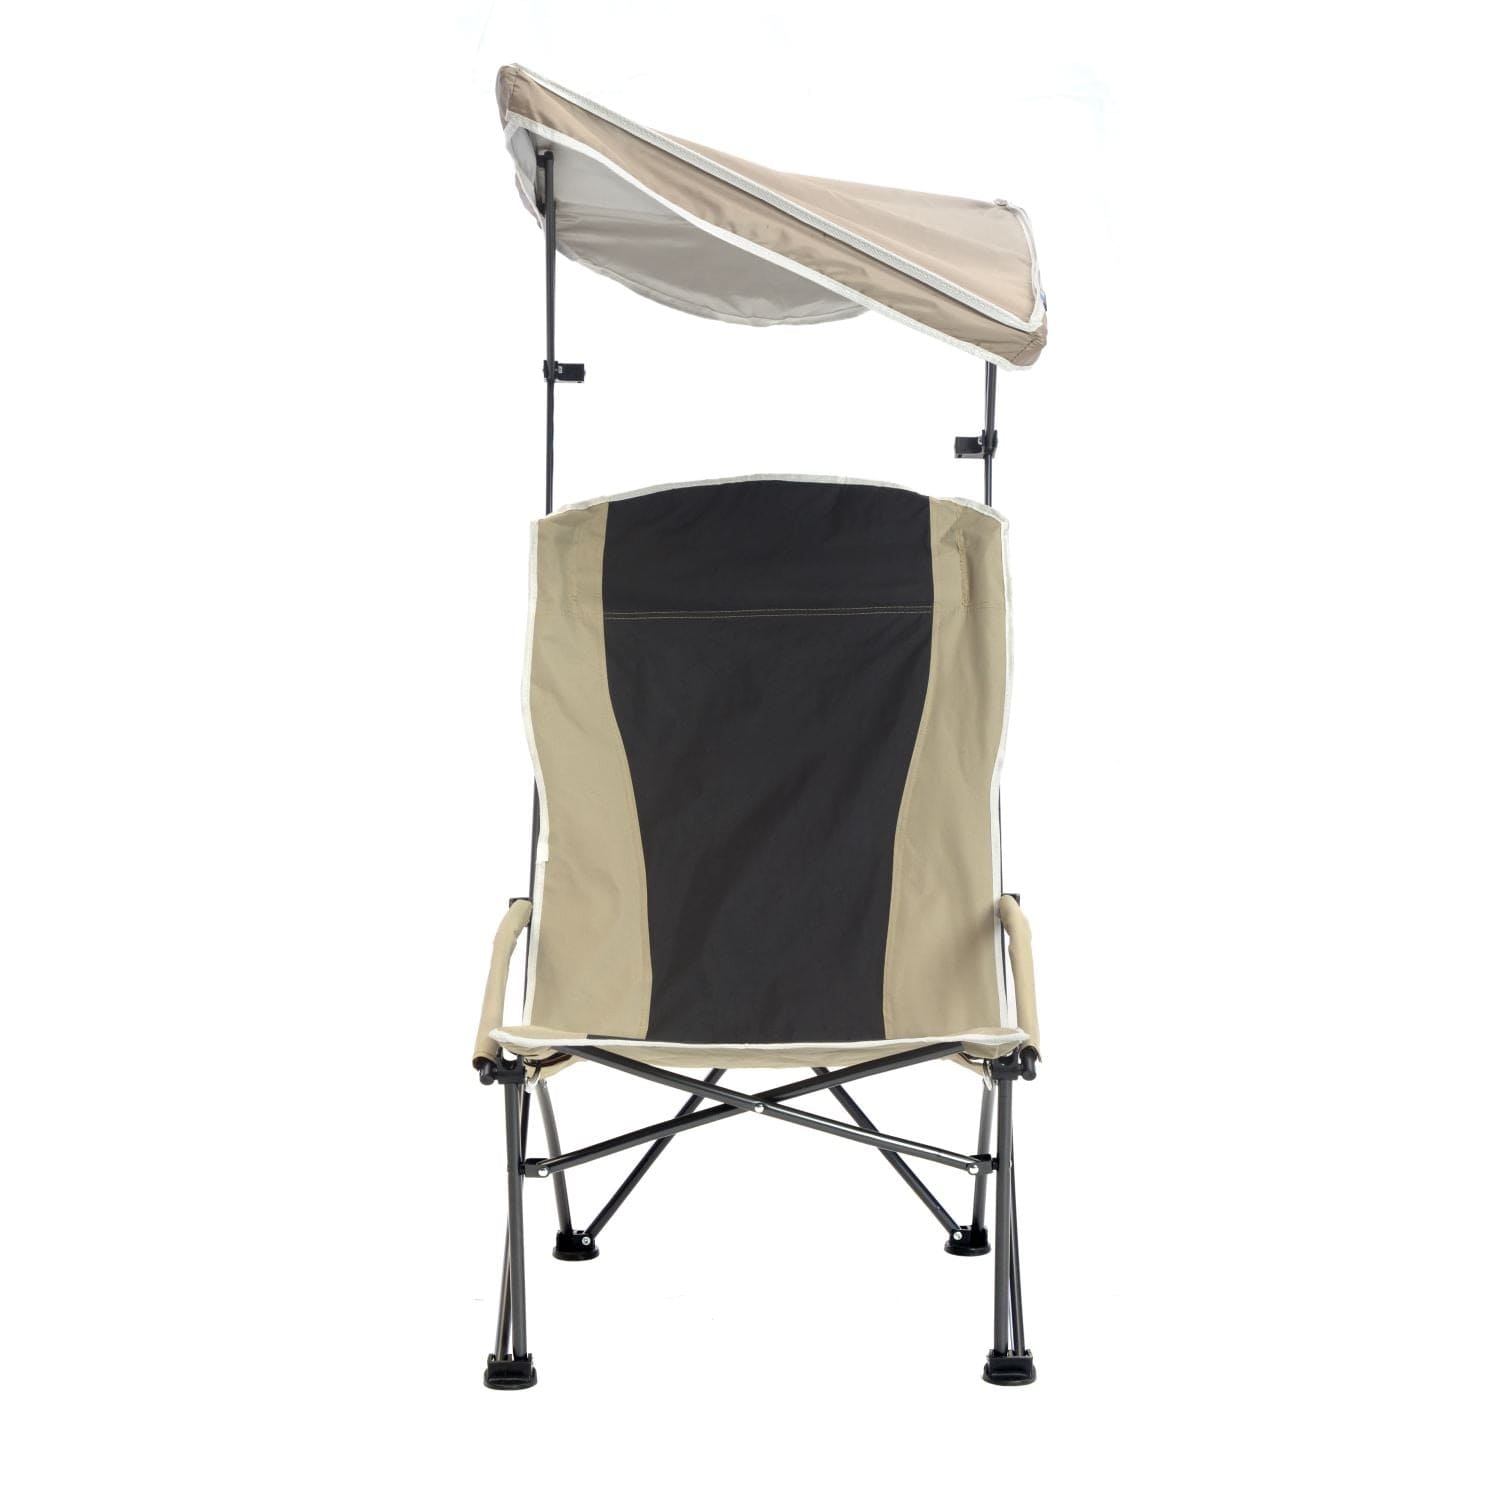 Quik Chair Portable Chairs Quik Chair | Pro Comfort High Back Shade Folding Chair - Tan/Black 160087DS